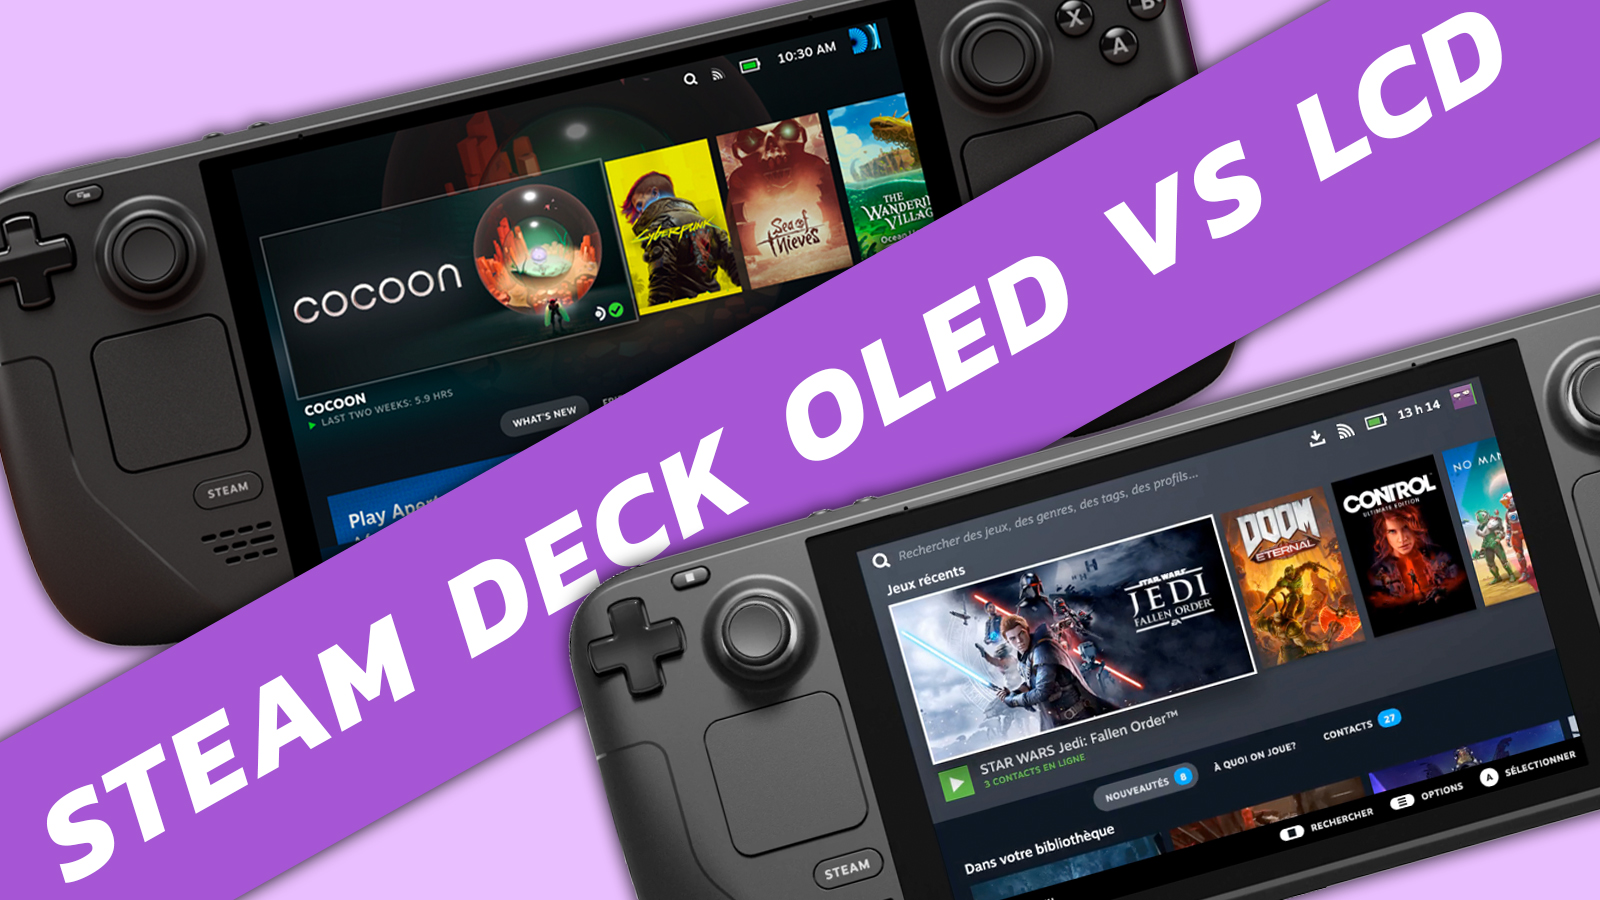 The Steam Deck OLED is here, but Valve say not to expect a true